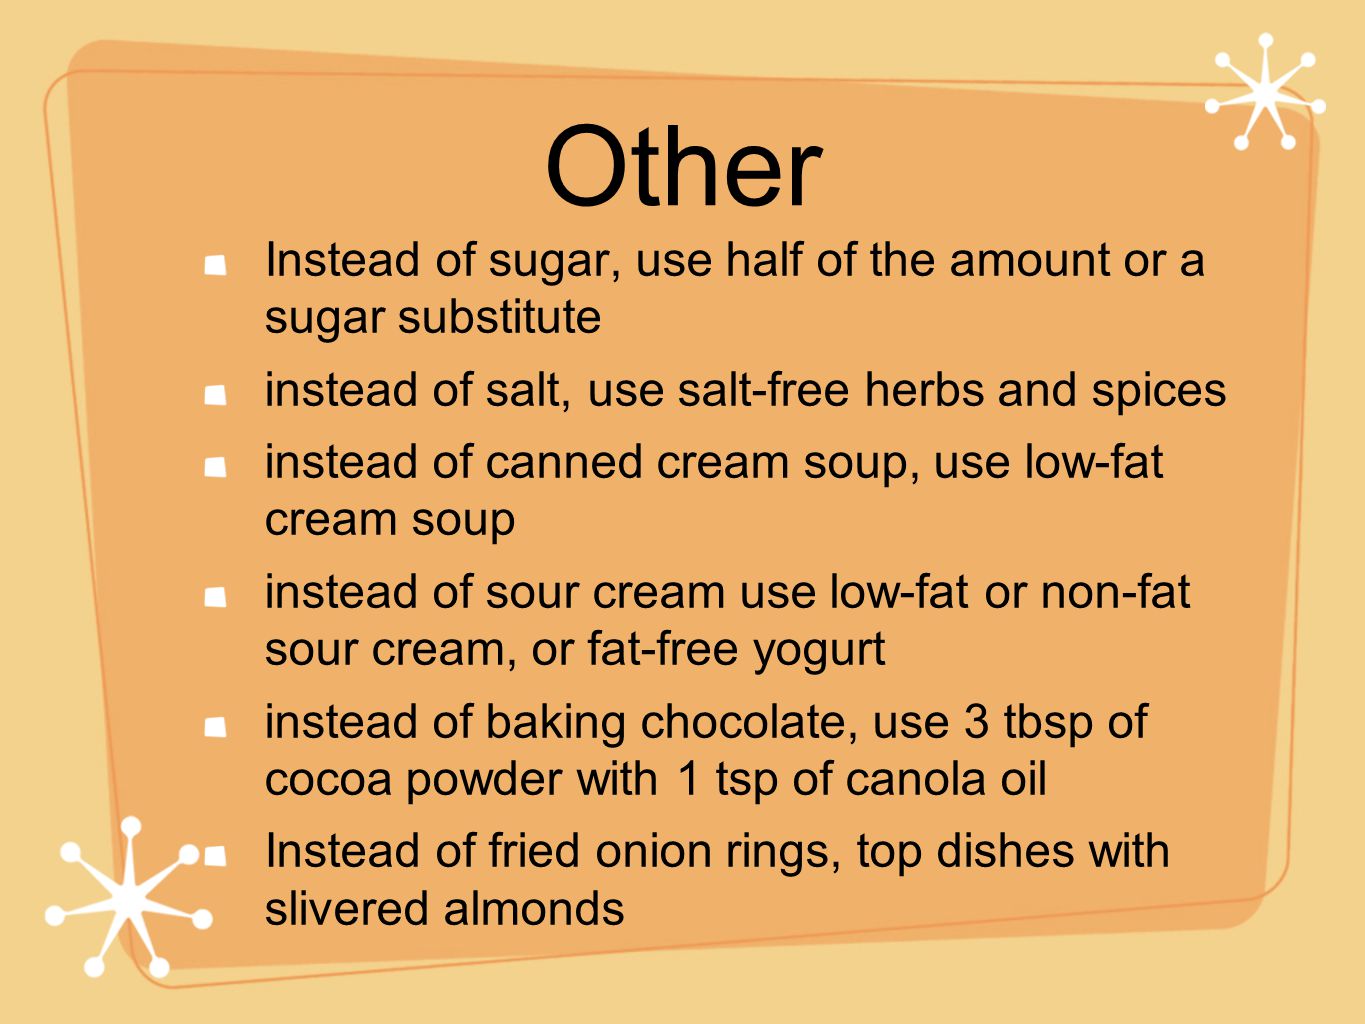 Other Instead of sugar, use half of the amount or a sugar substitute instead of salt, use salt-free herbs and spices instead of canned cream soup, use low-fat cream soup instead of sour cream use low-fat or non-fat sour cream, or fat-free yogurt instead of baking chocolate, use 3 tbsp of cocoa powder with 1 tsp of canola oil Instead of fried onion rings, top dishes with slivered almonds